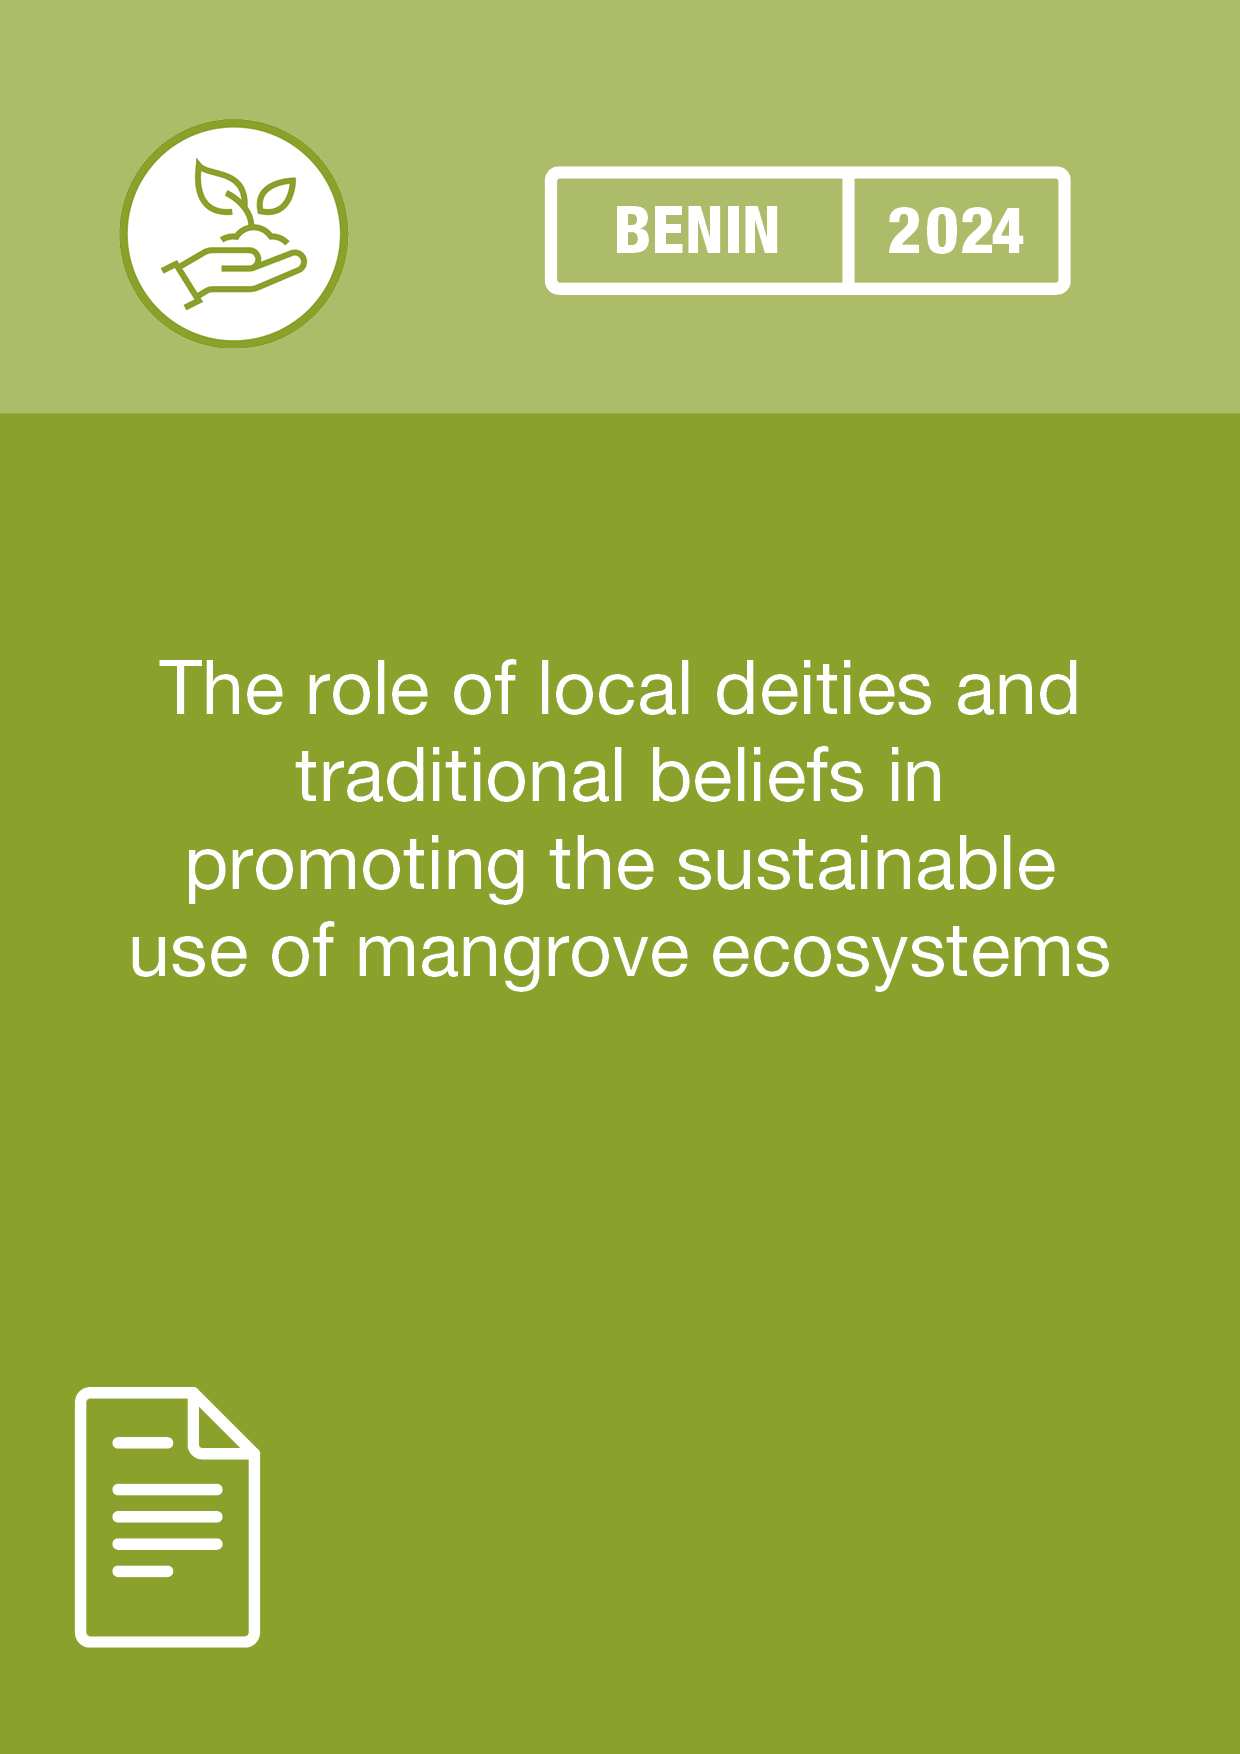 The role of local deities and traditional beliefs in promoting the sustainable use of mangrove ecosystems